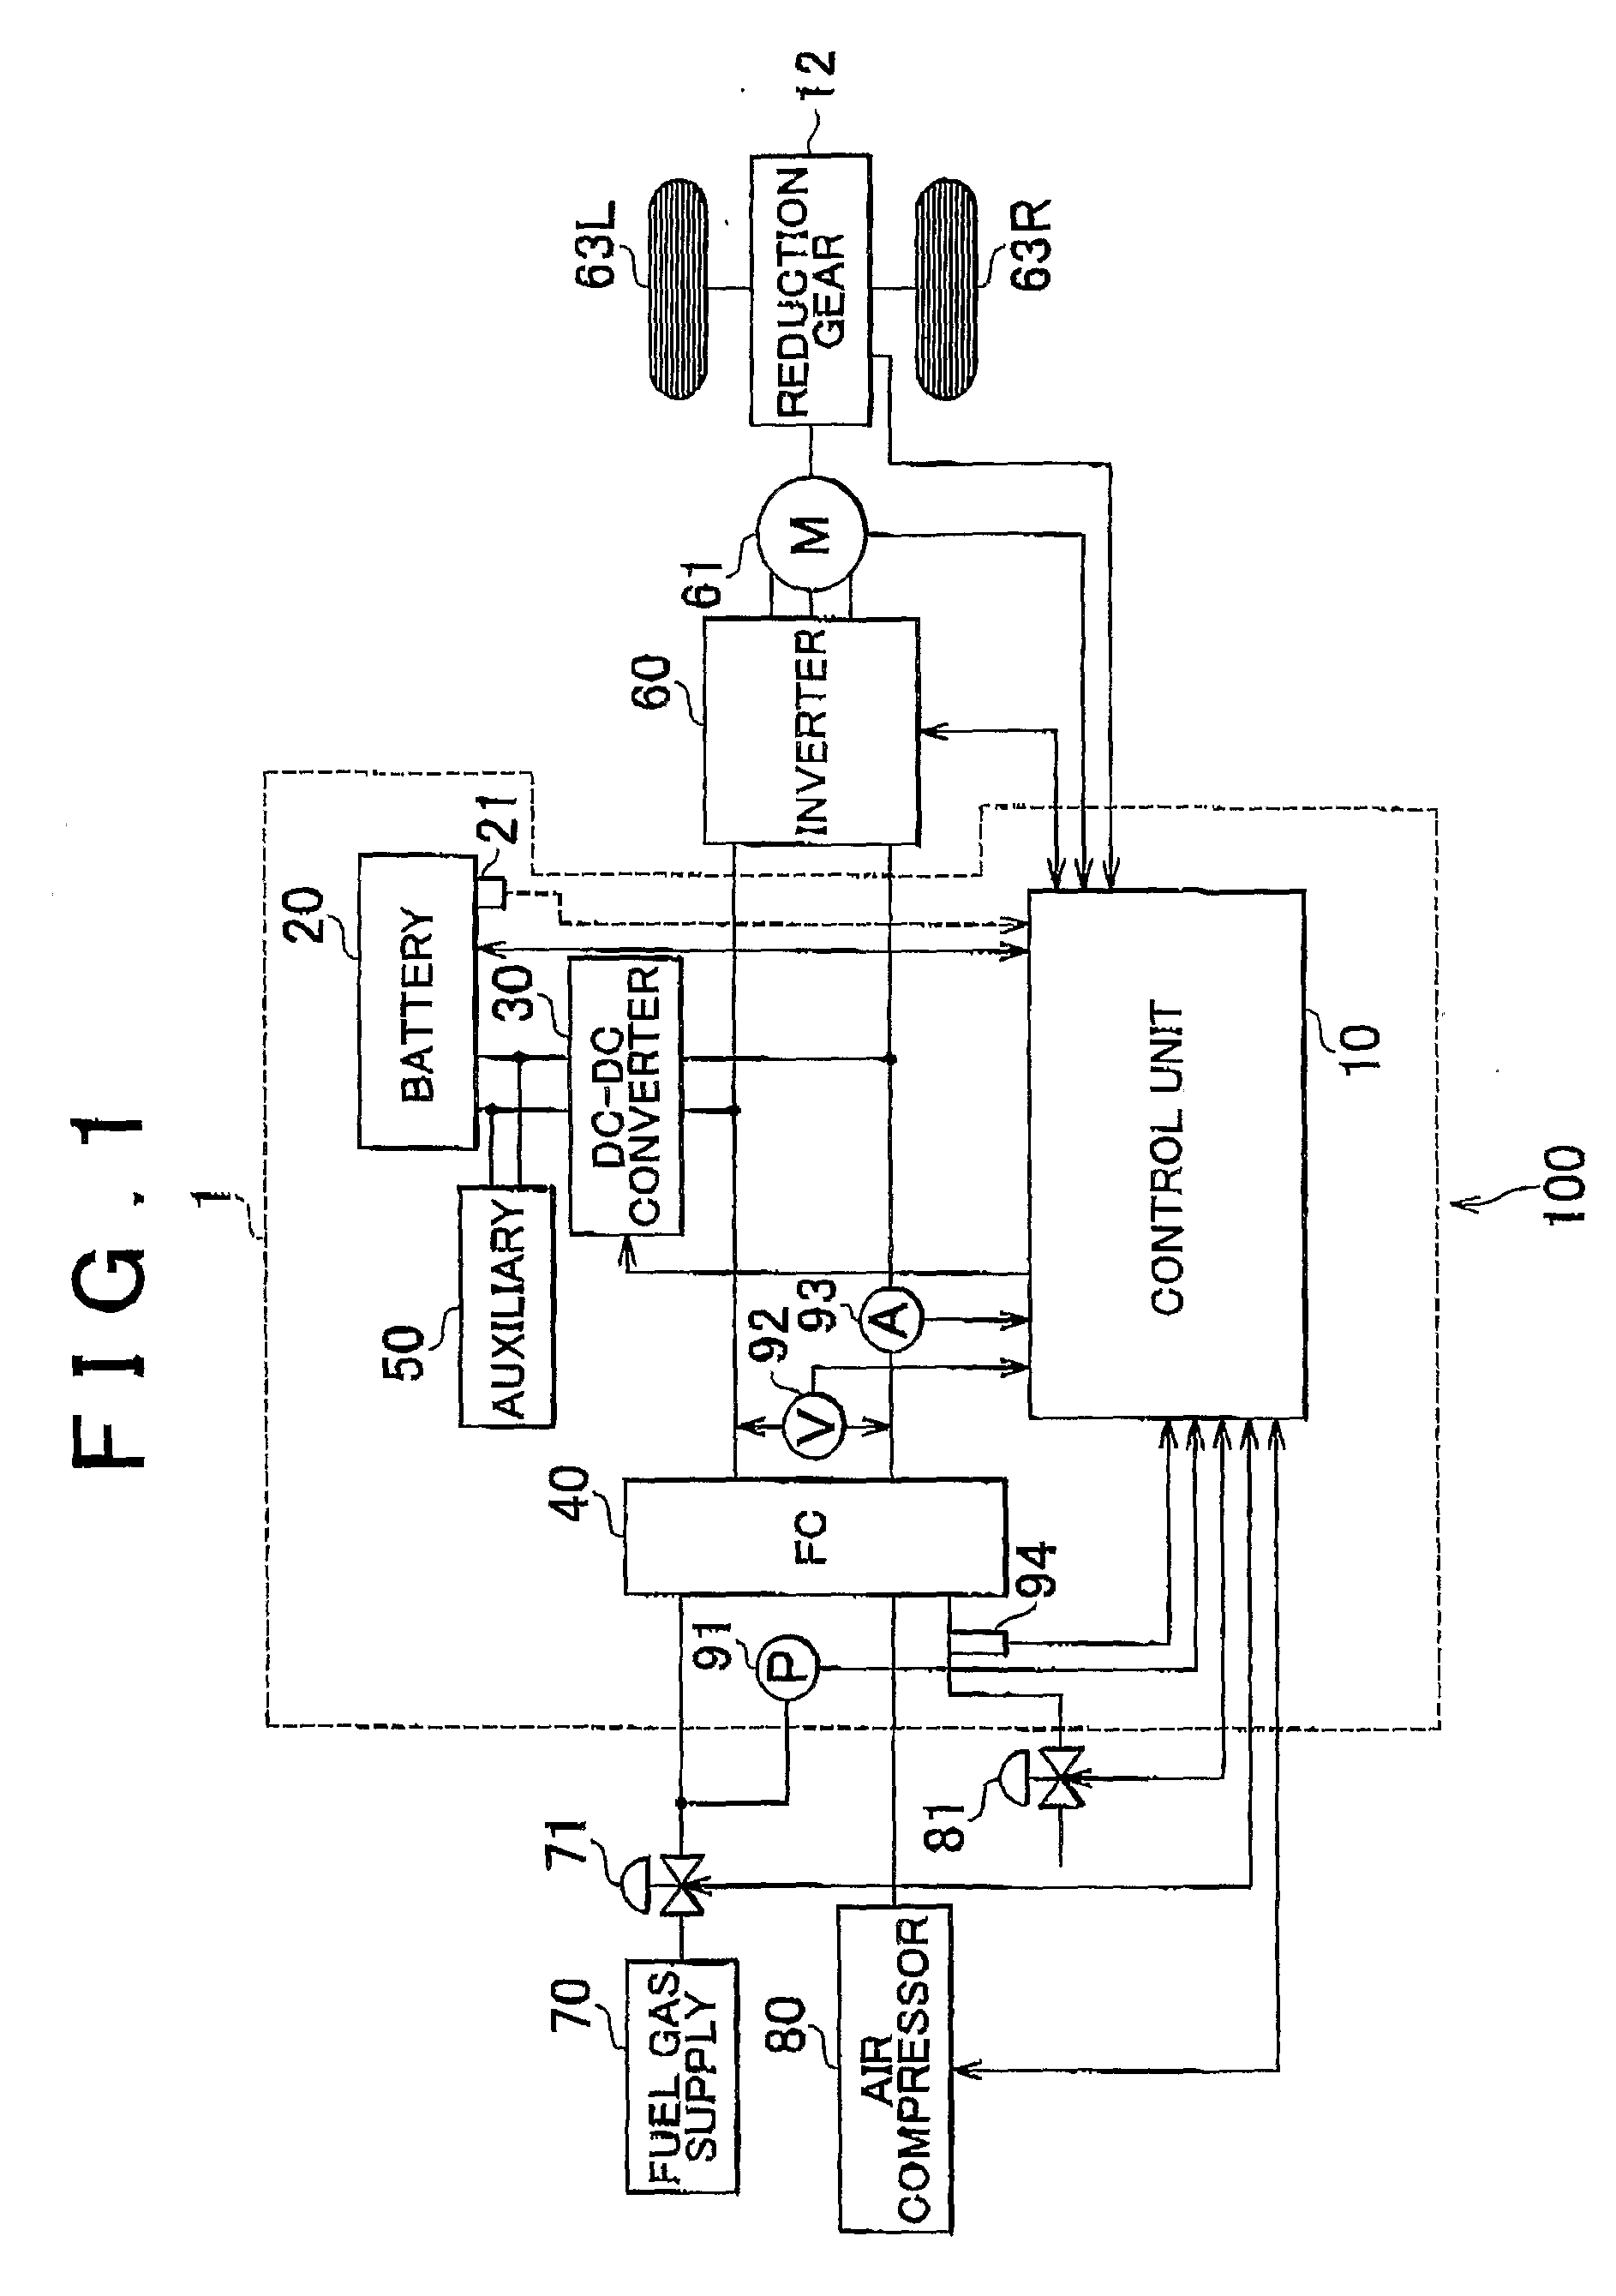 Fuel cell apparatus, vehicle including the fuel cell apparatus, and power management method for a system equipped with fuel cell unit